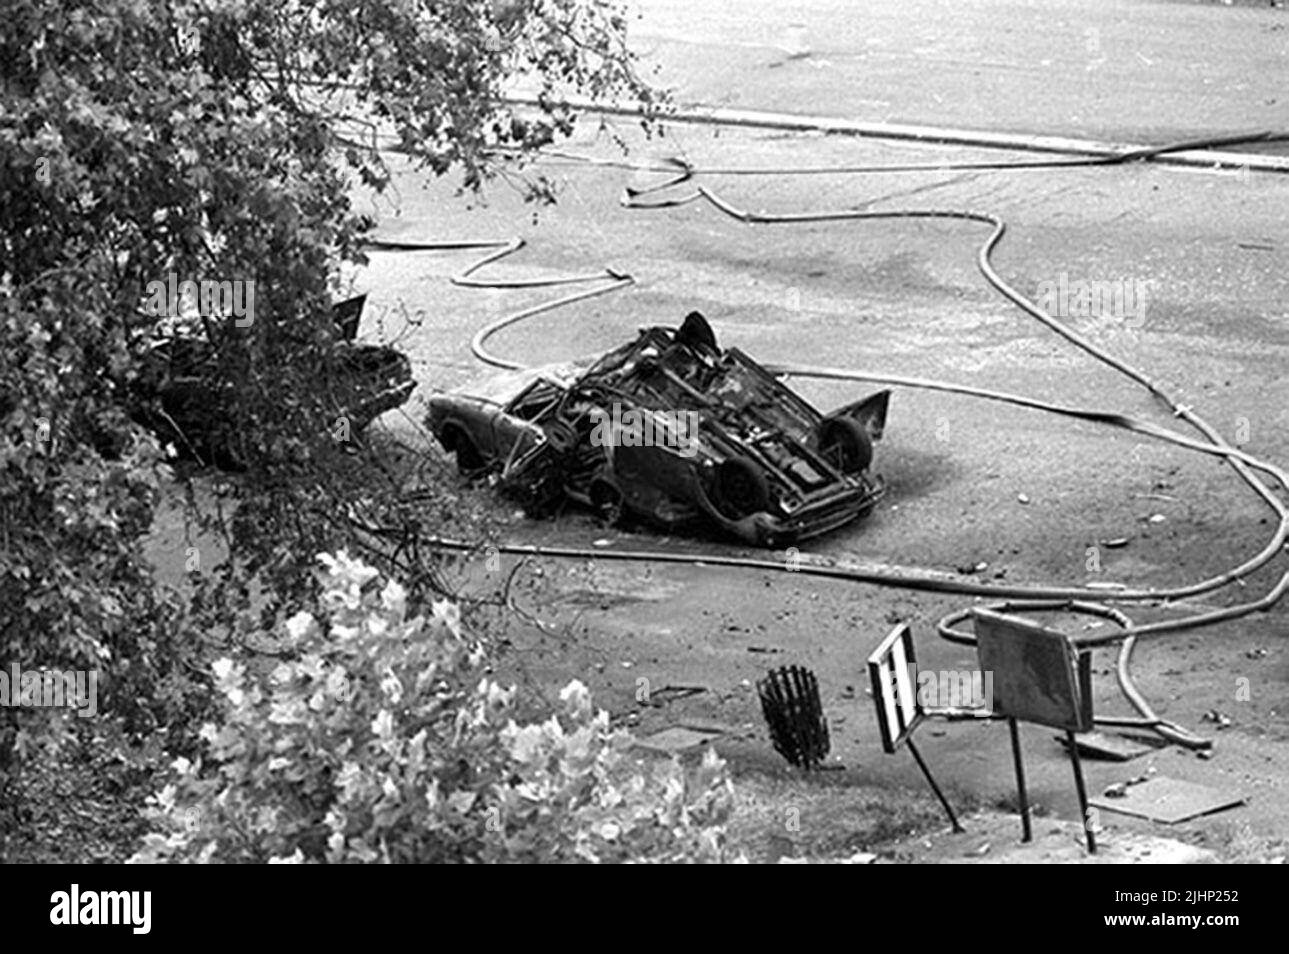 File photo dated 20/7/1982 of a mini car upside on the roof of anther car in Rotten Row, London after a car bomb blasted a party of Cavalyman riding past on their way to the Guard Changing ceremony in Whitehall. The families of soldiers killed in the Hyde Park and Regent's Park IRA bombings have told how their suffering remains undiminished 40 years on. In total 11 military personnel died in the two attacks which occurred within hours of each other in London on July 20 1982. Issue date: Wednesday July 20, 2022. Stock Photo